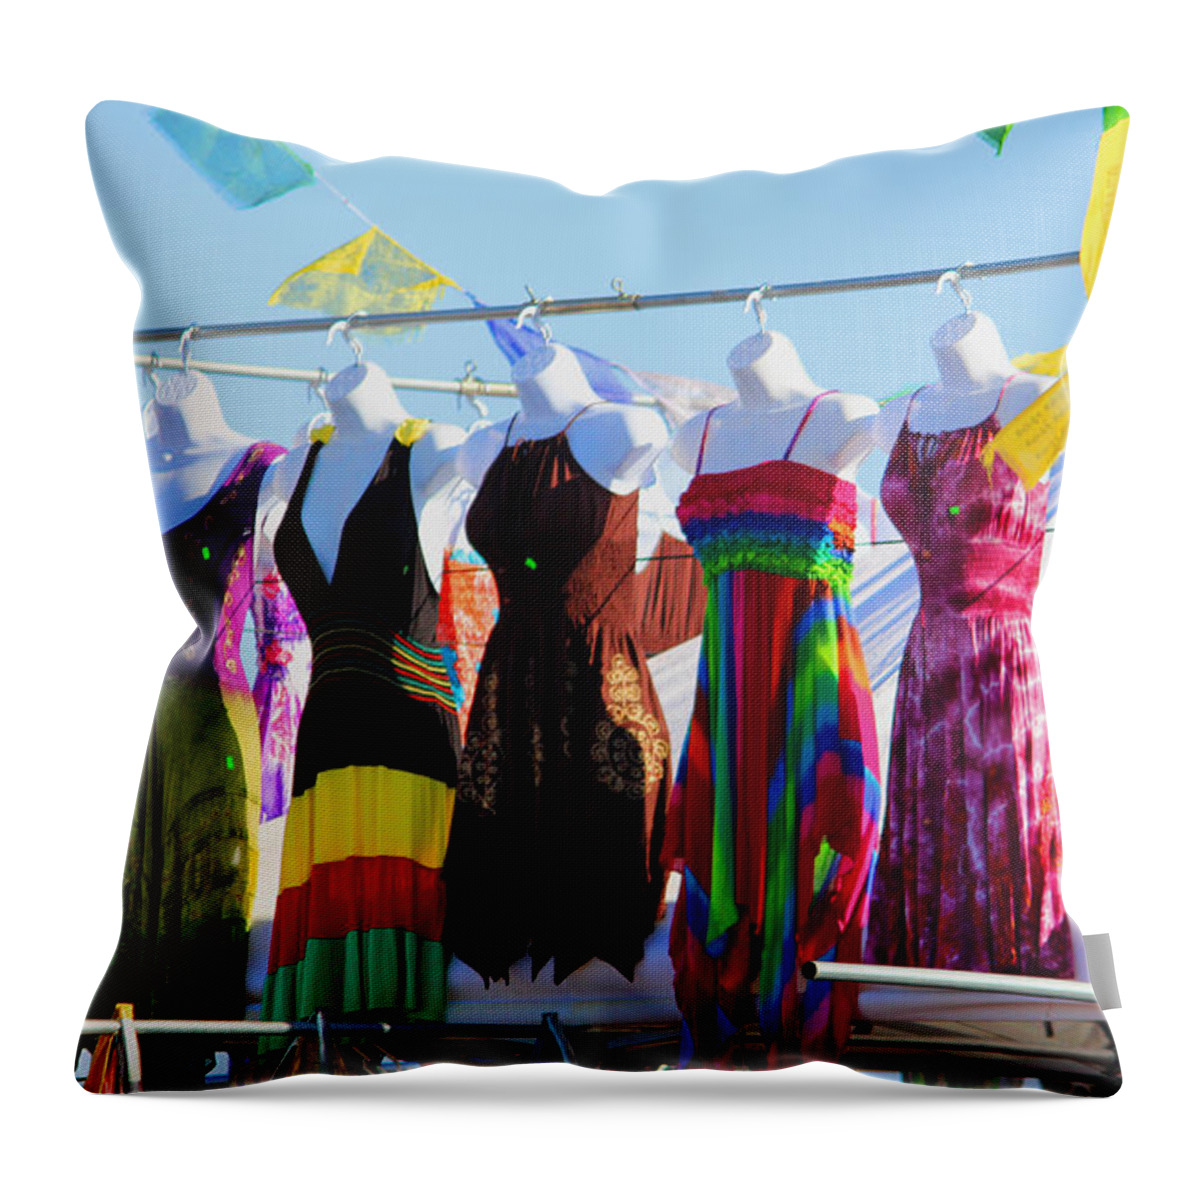 Clothing Throw Pillow featuring the photograph Dress For Excess by Kym Backland